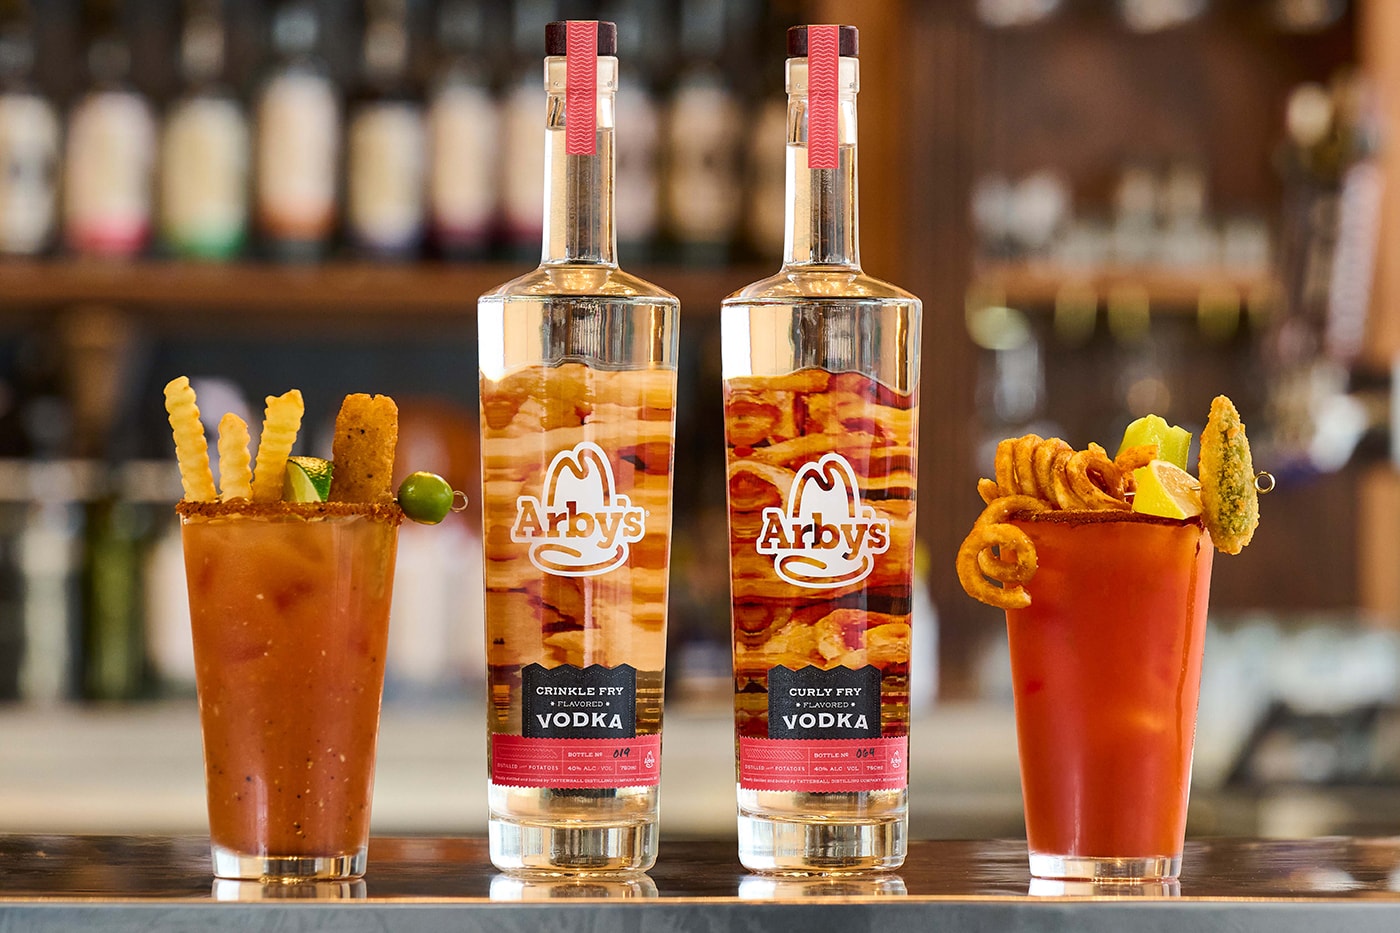 Arby's Limited-Edition Curly Fry Crinkle Fry Vodka Release